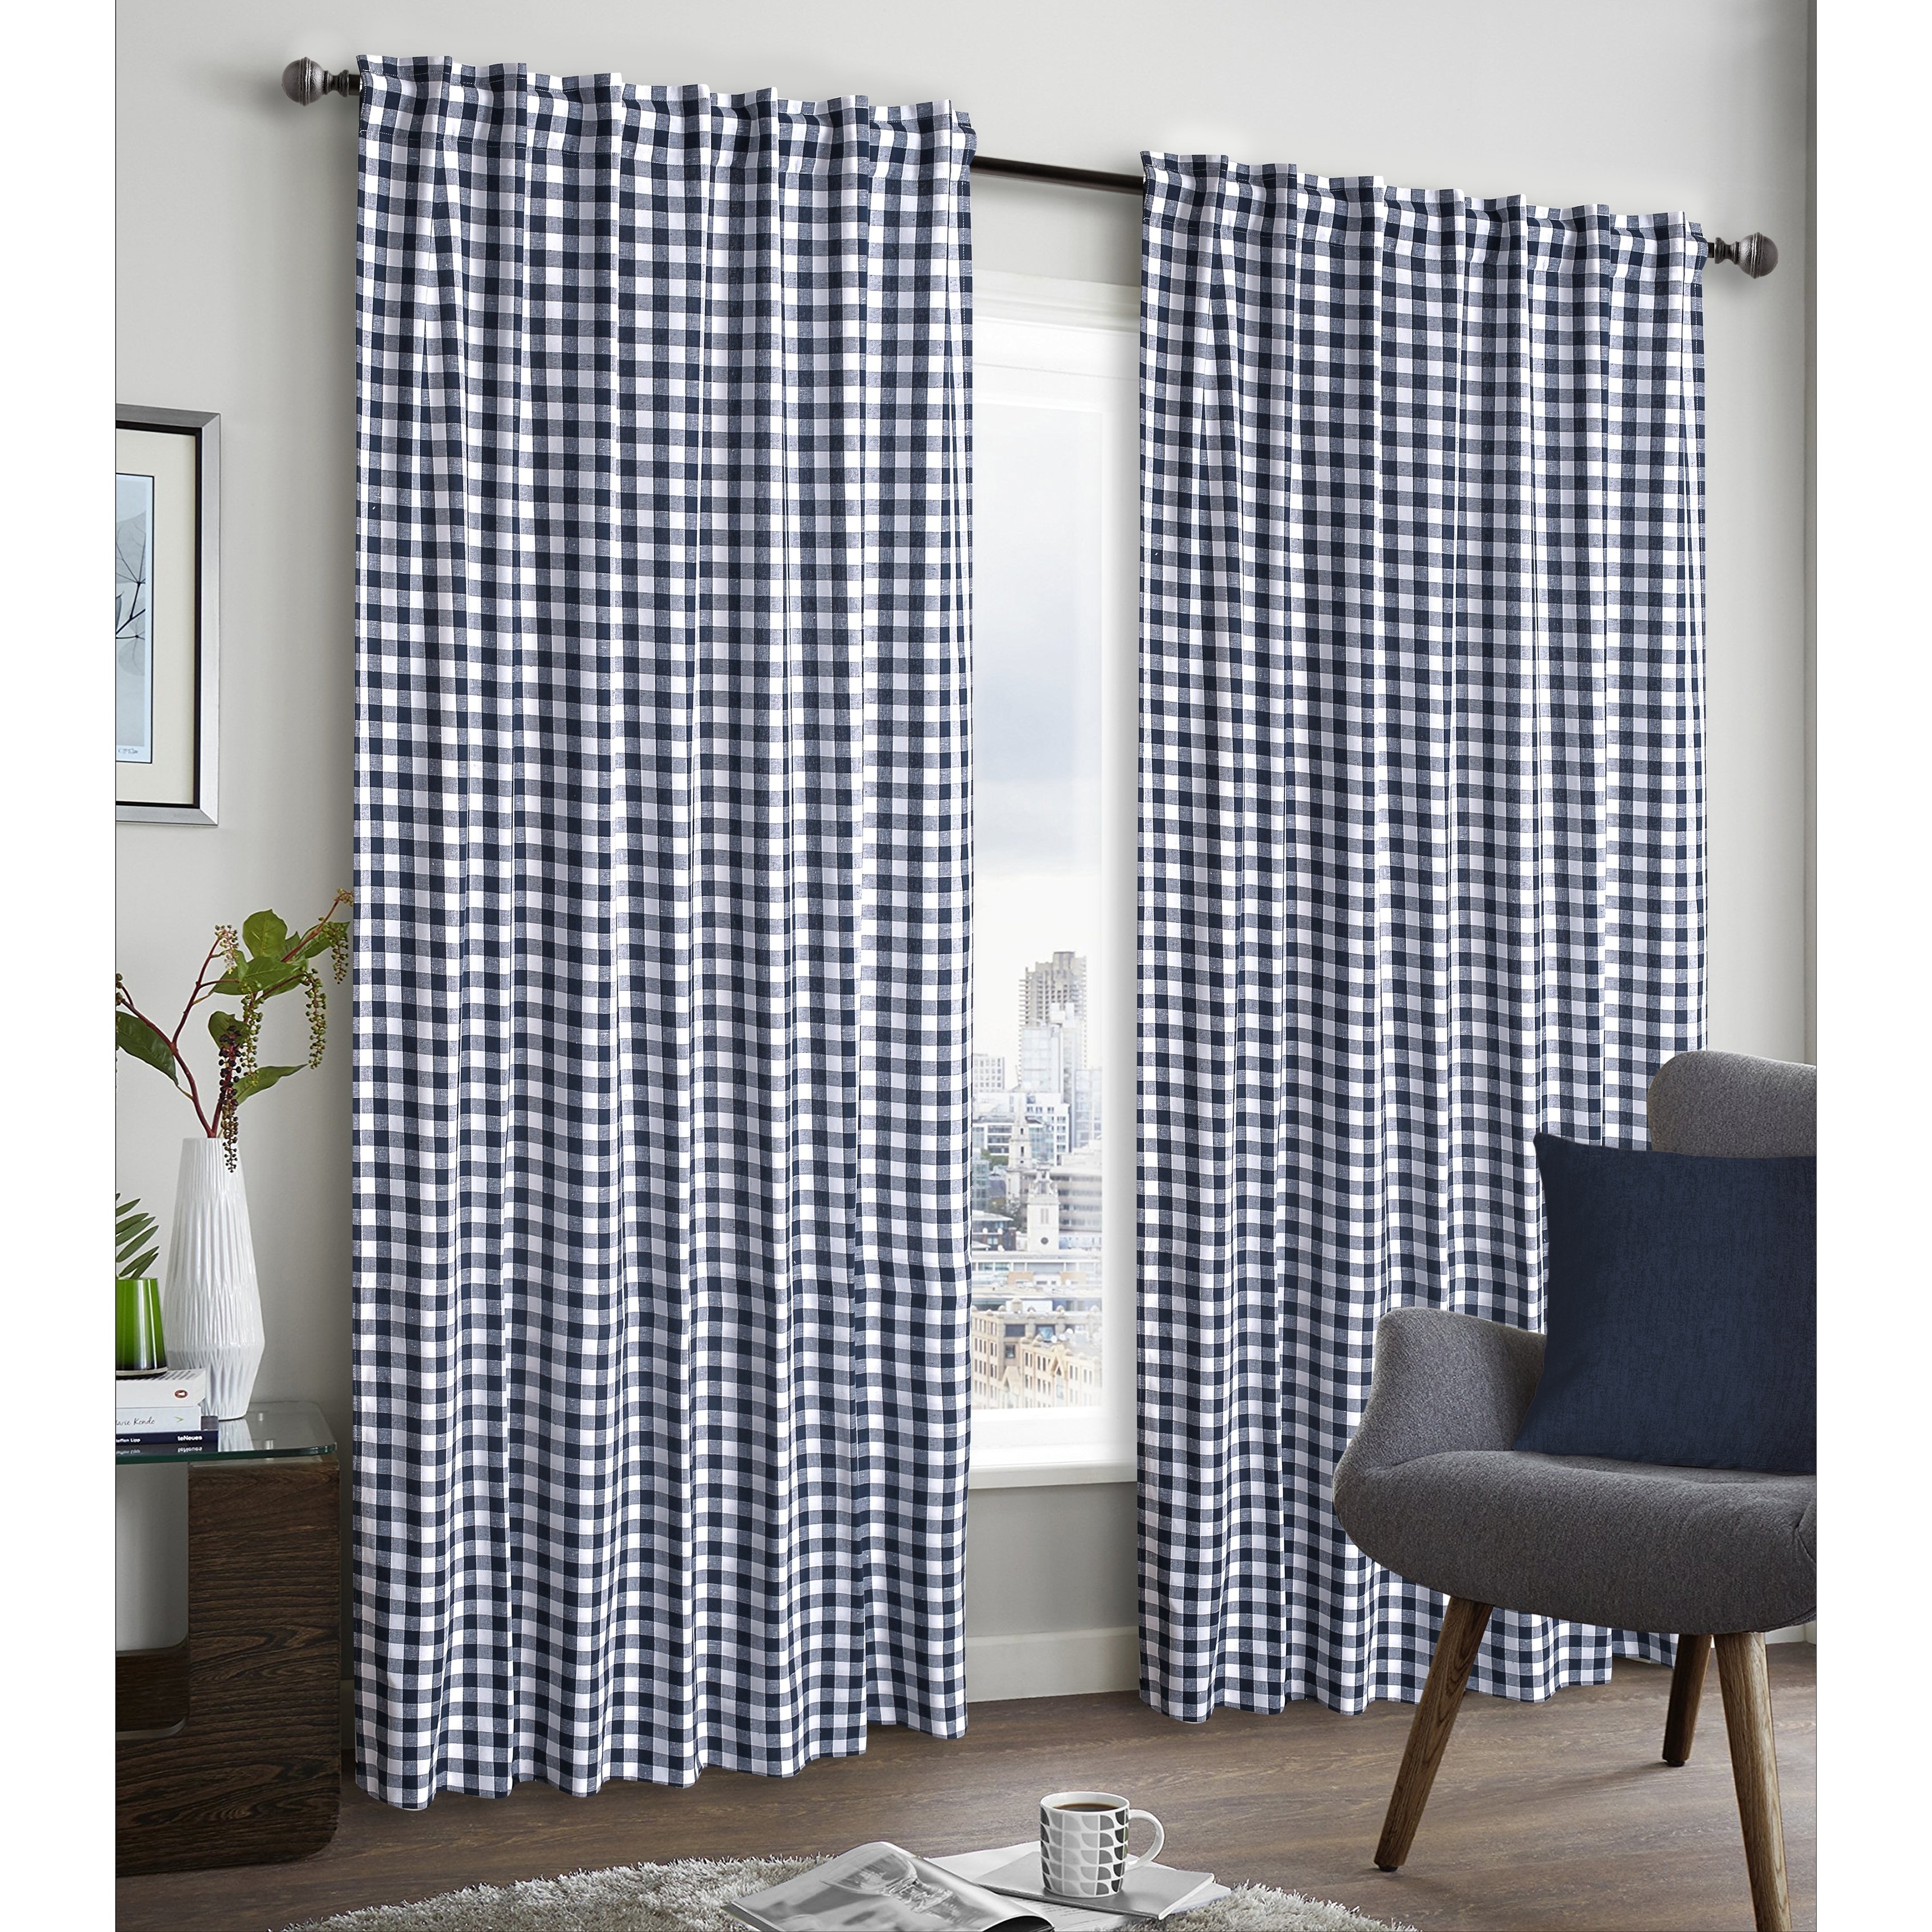 100 cotton curtains how to wash